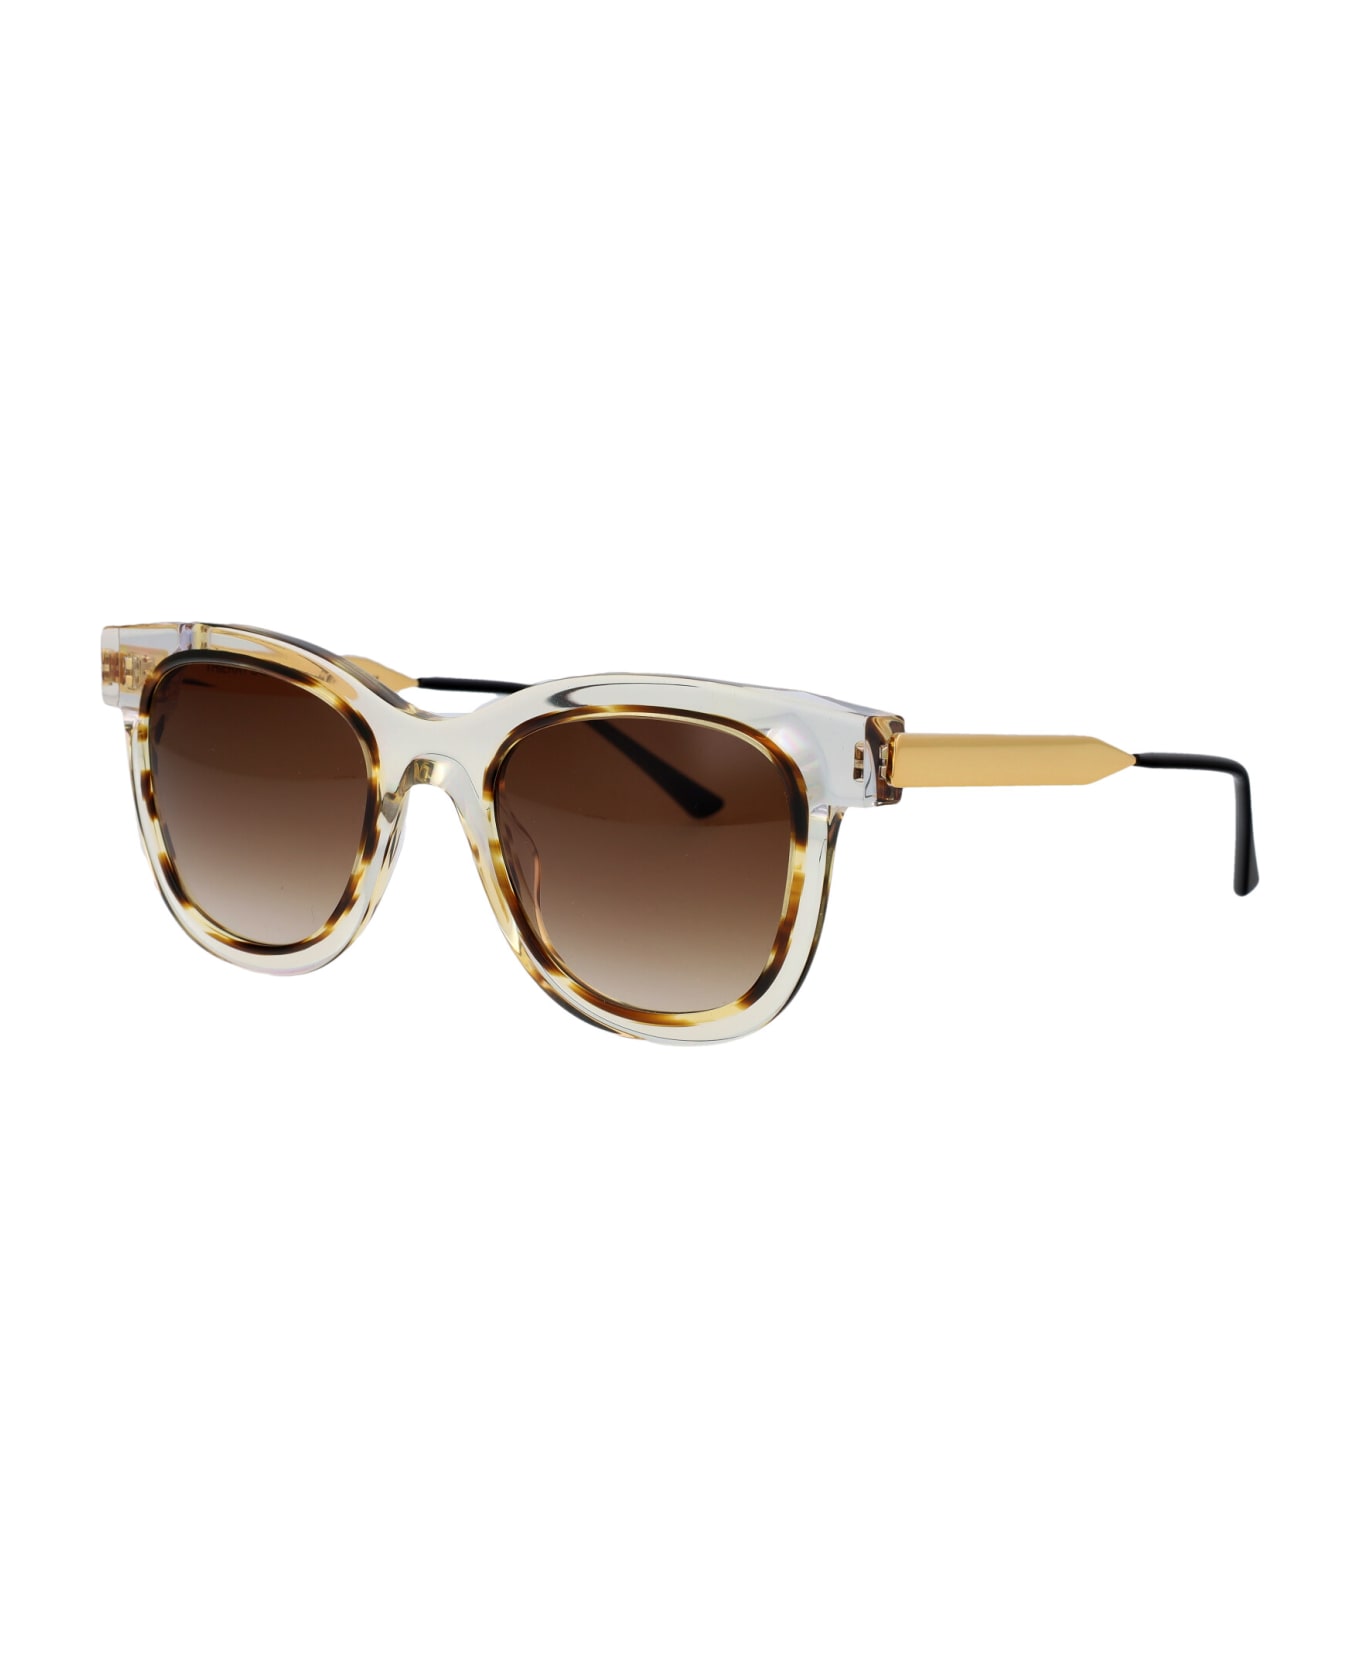 Thierry Lasry Savvvy Sunglasses - 995 GOLD